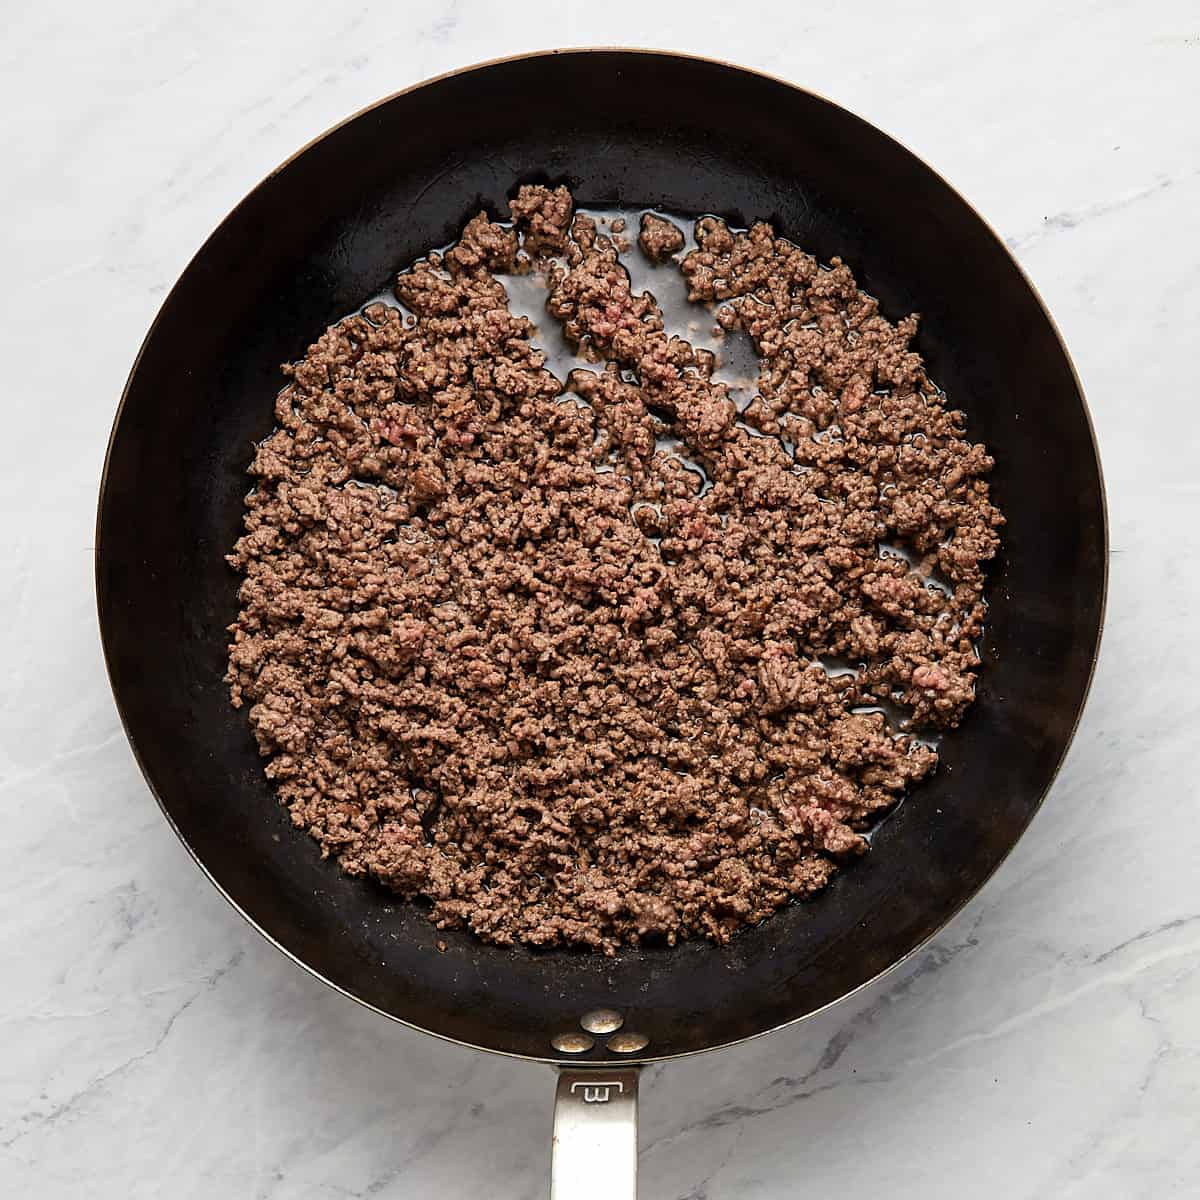 cooked ground beef in a pan